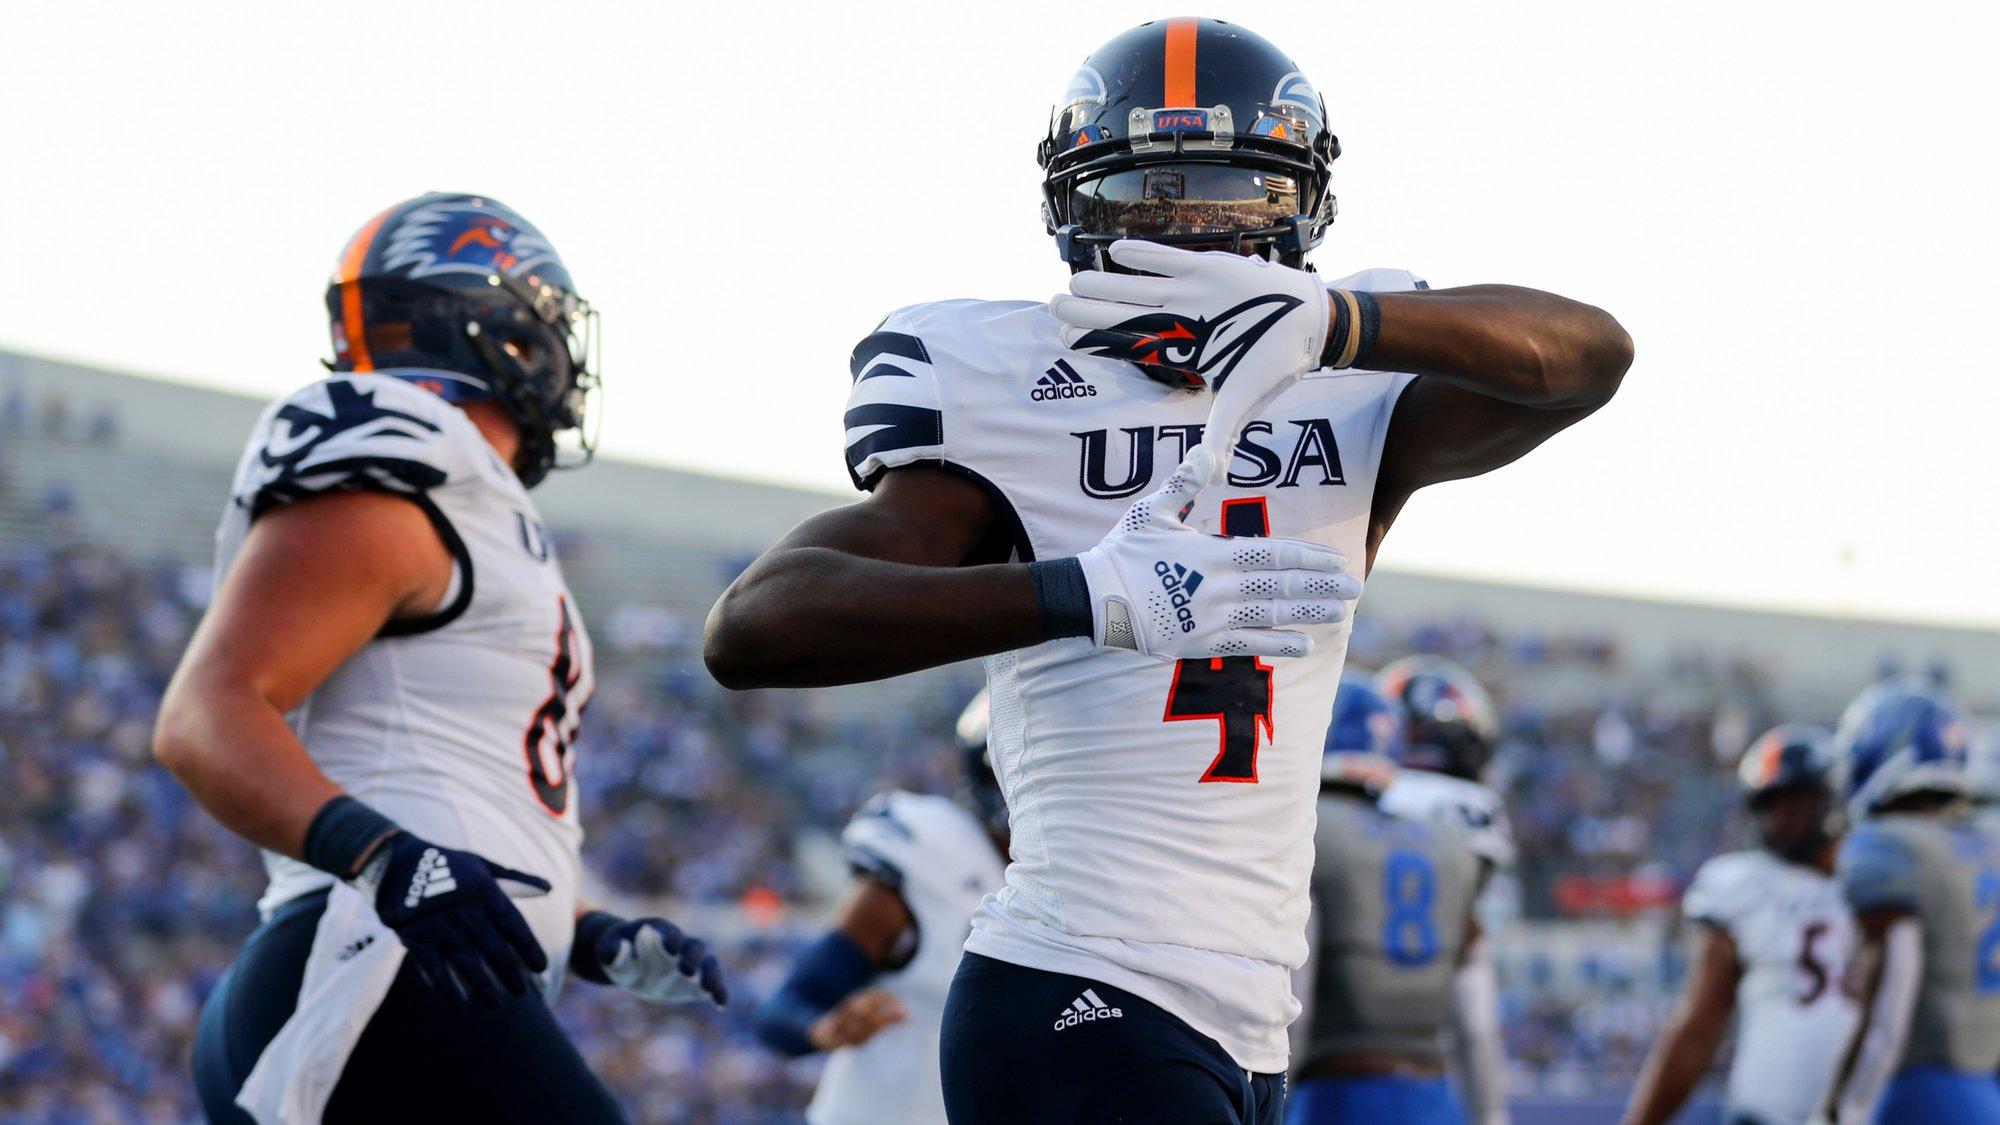 UTSA Roadrunners vs UTEP Miners Betting Preview: Eyes on El Paso With Undefeated UTSA in Action on ESPN